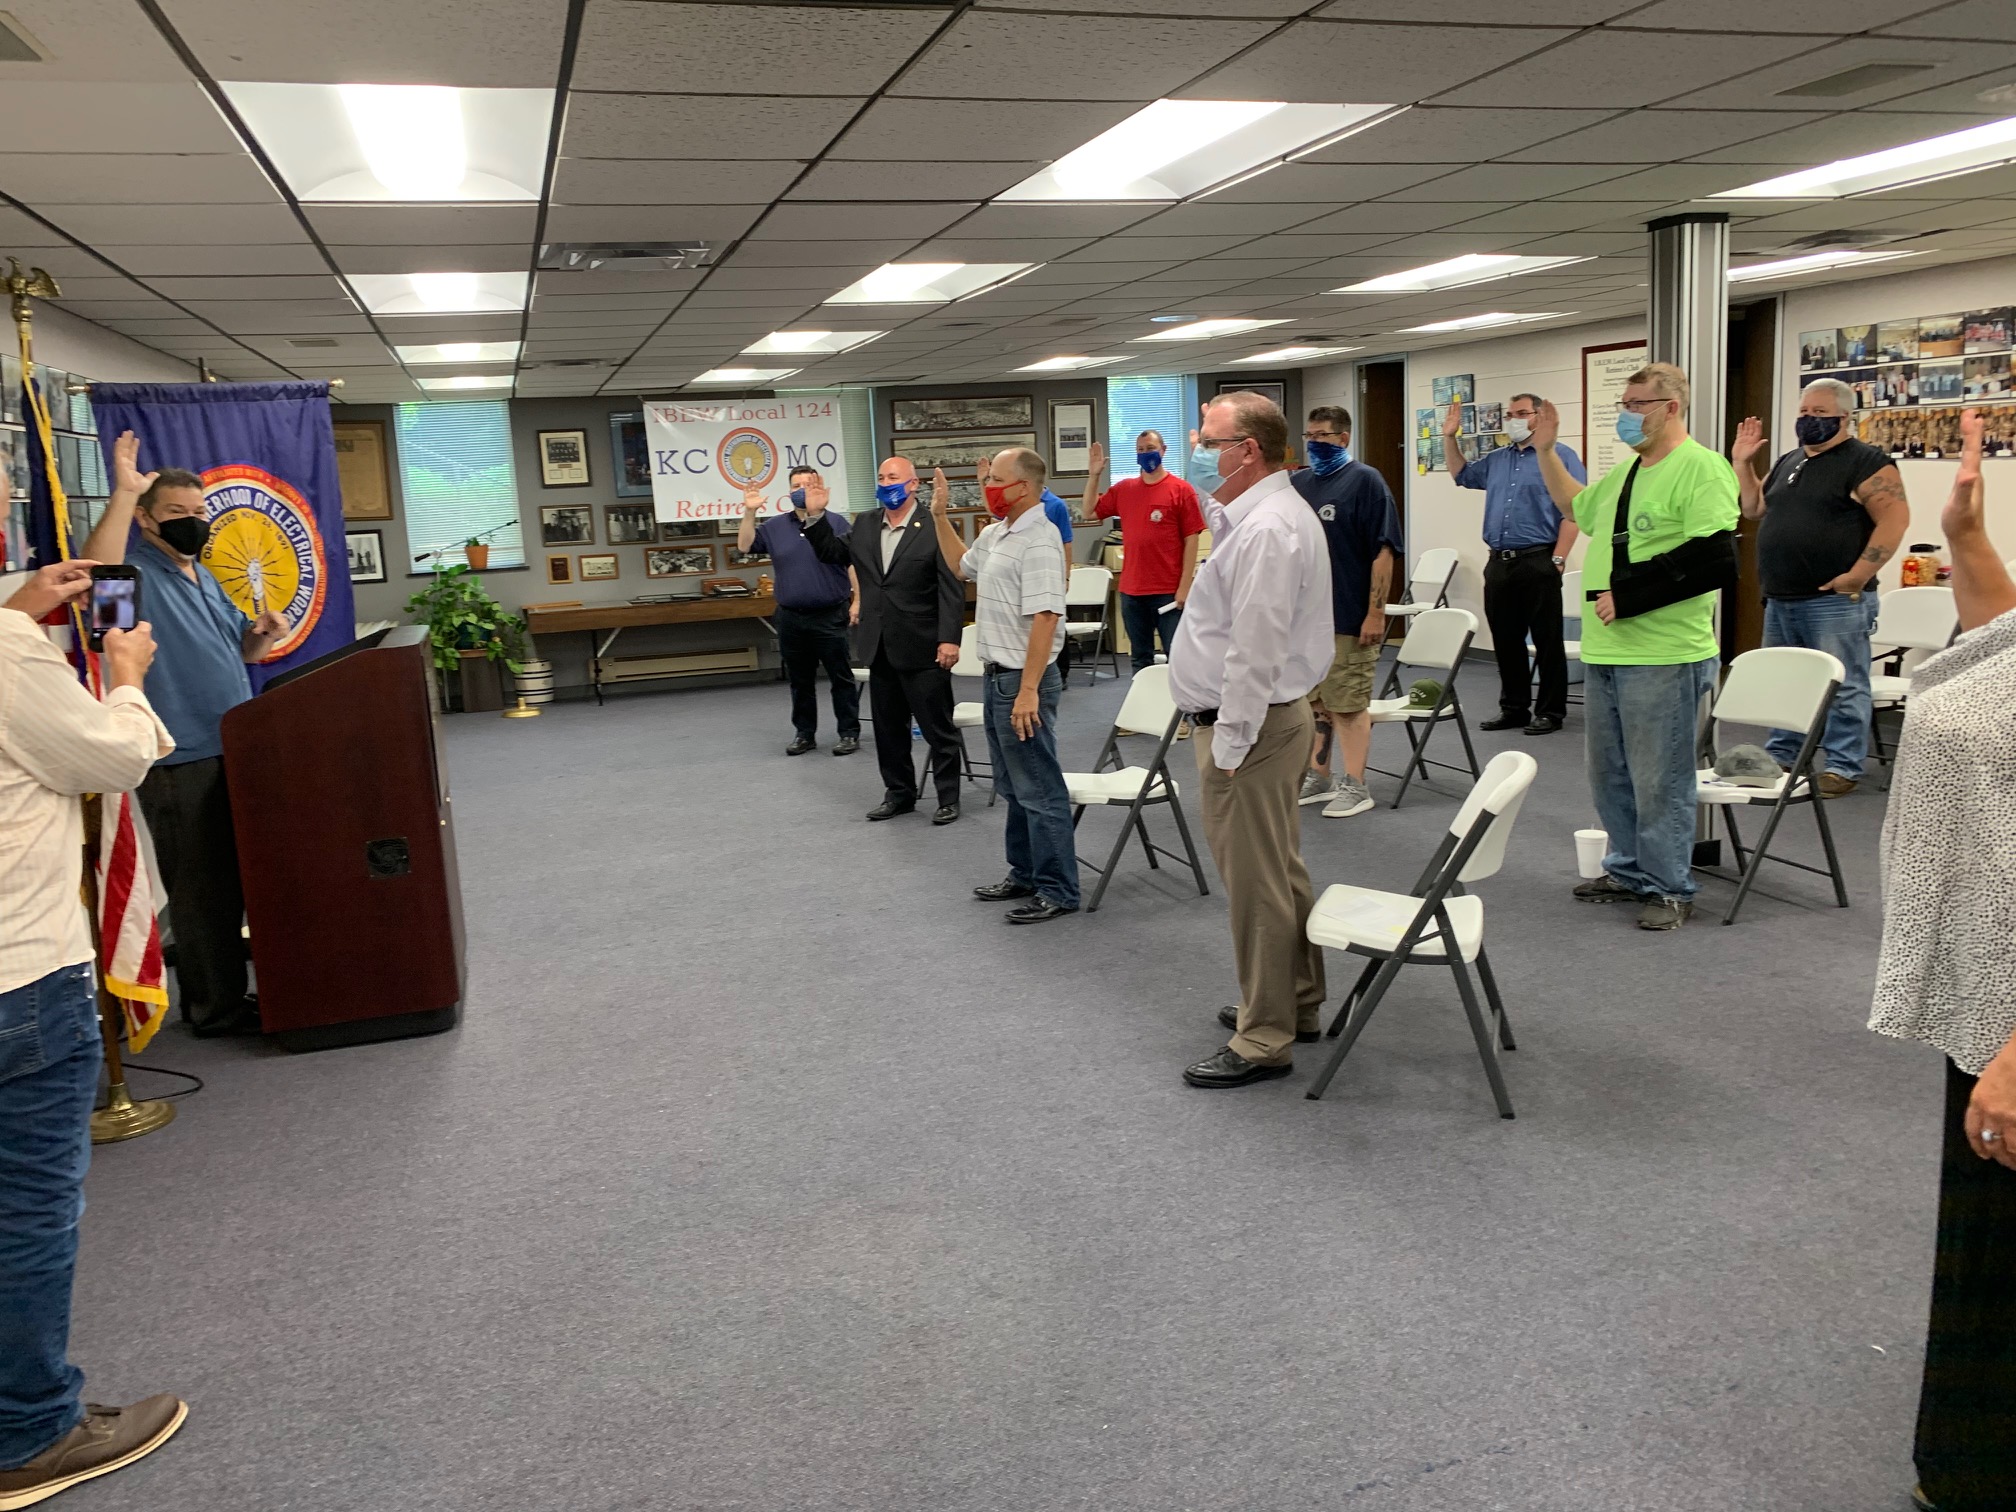 IBEW LOCAL 124 OFFICERS ARE SWORN IN